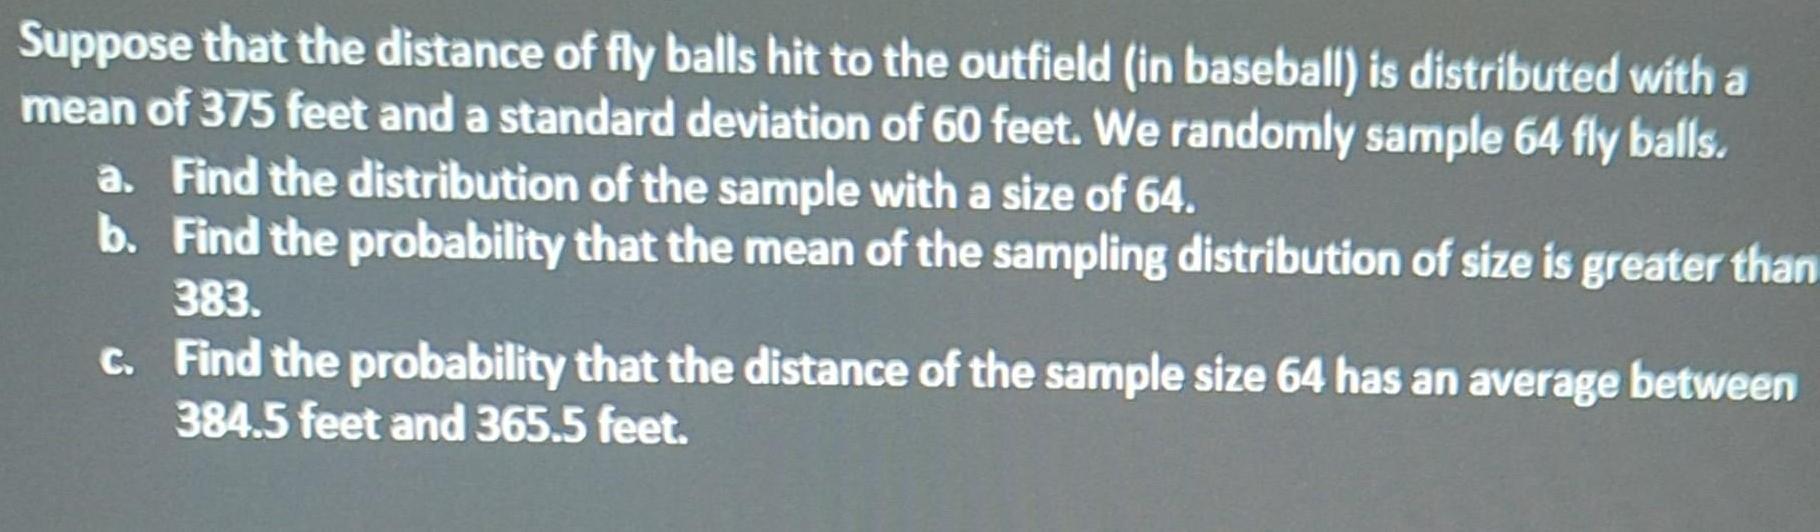 Suppose that the distance of fly balls hit to the outfield (in baseball) is distributed with a mean of 375